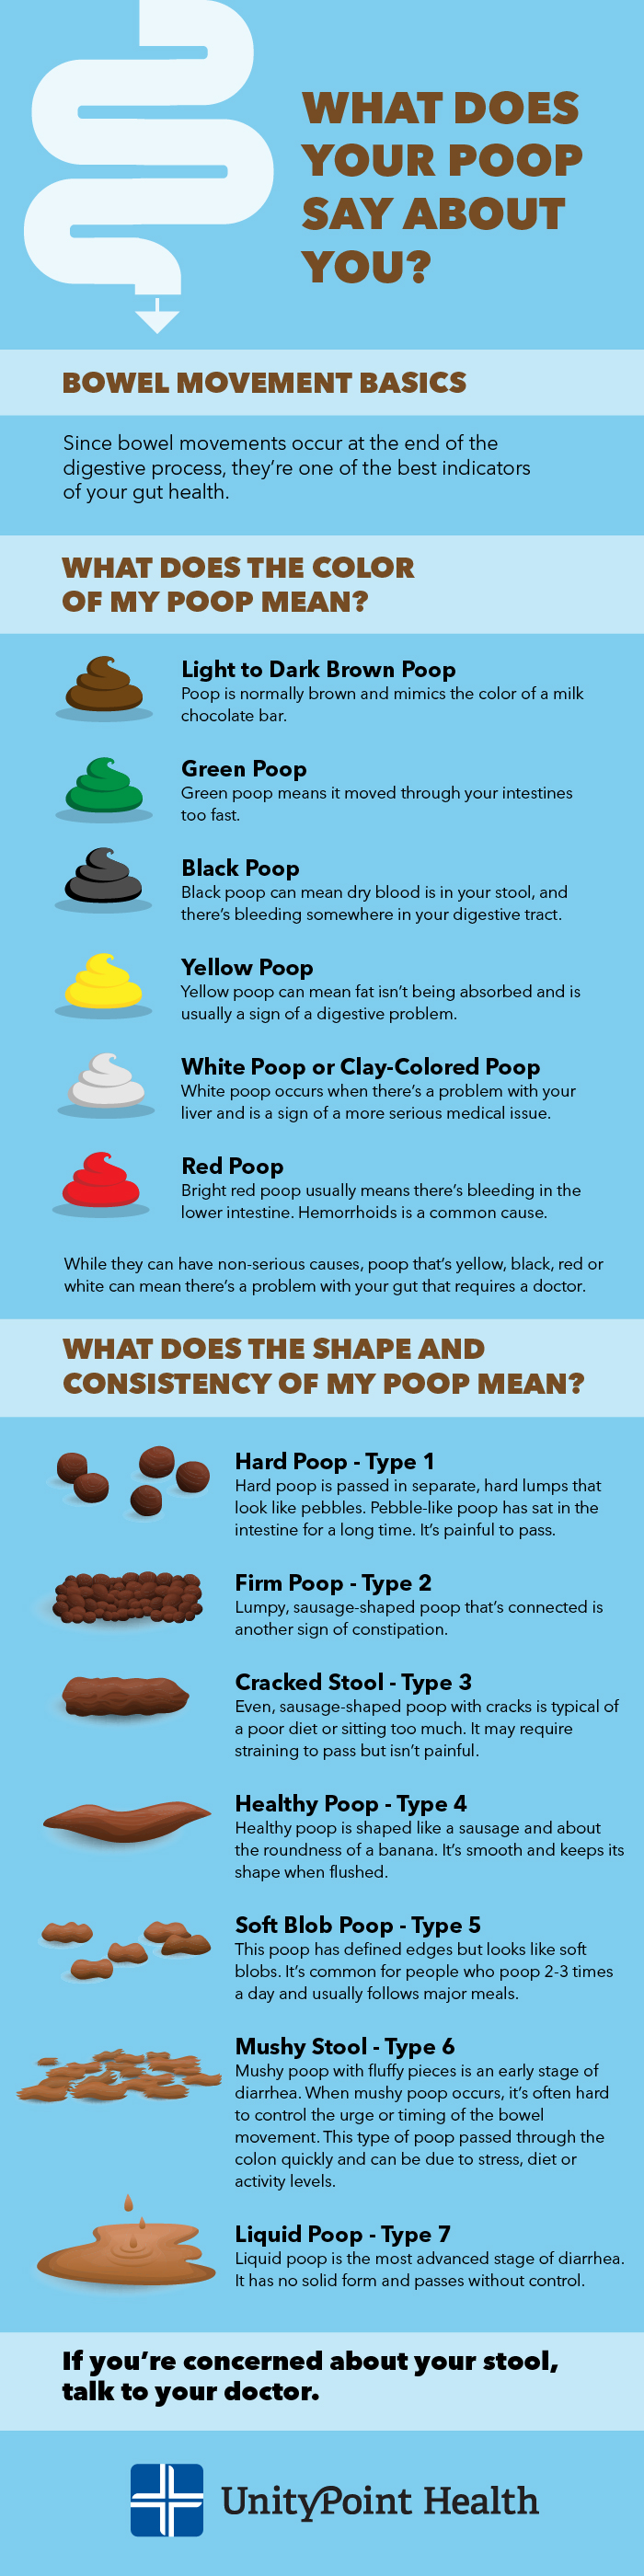 Your Poop Is Too Big to Come Out and Hurts. Now What?